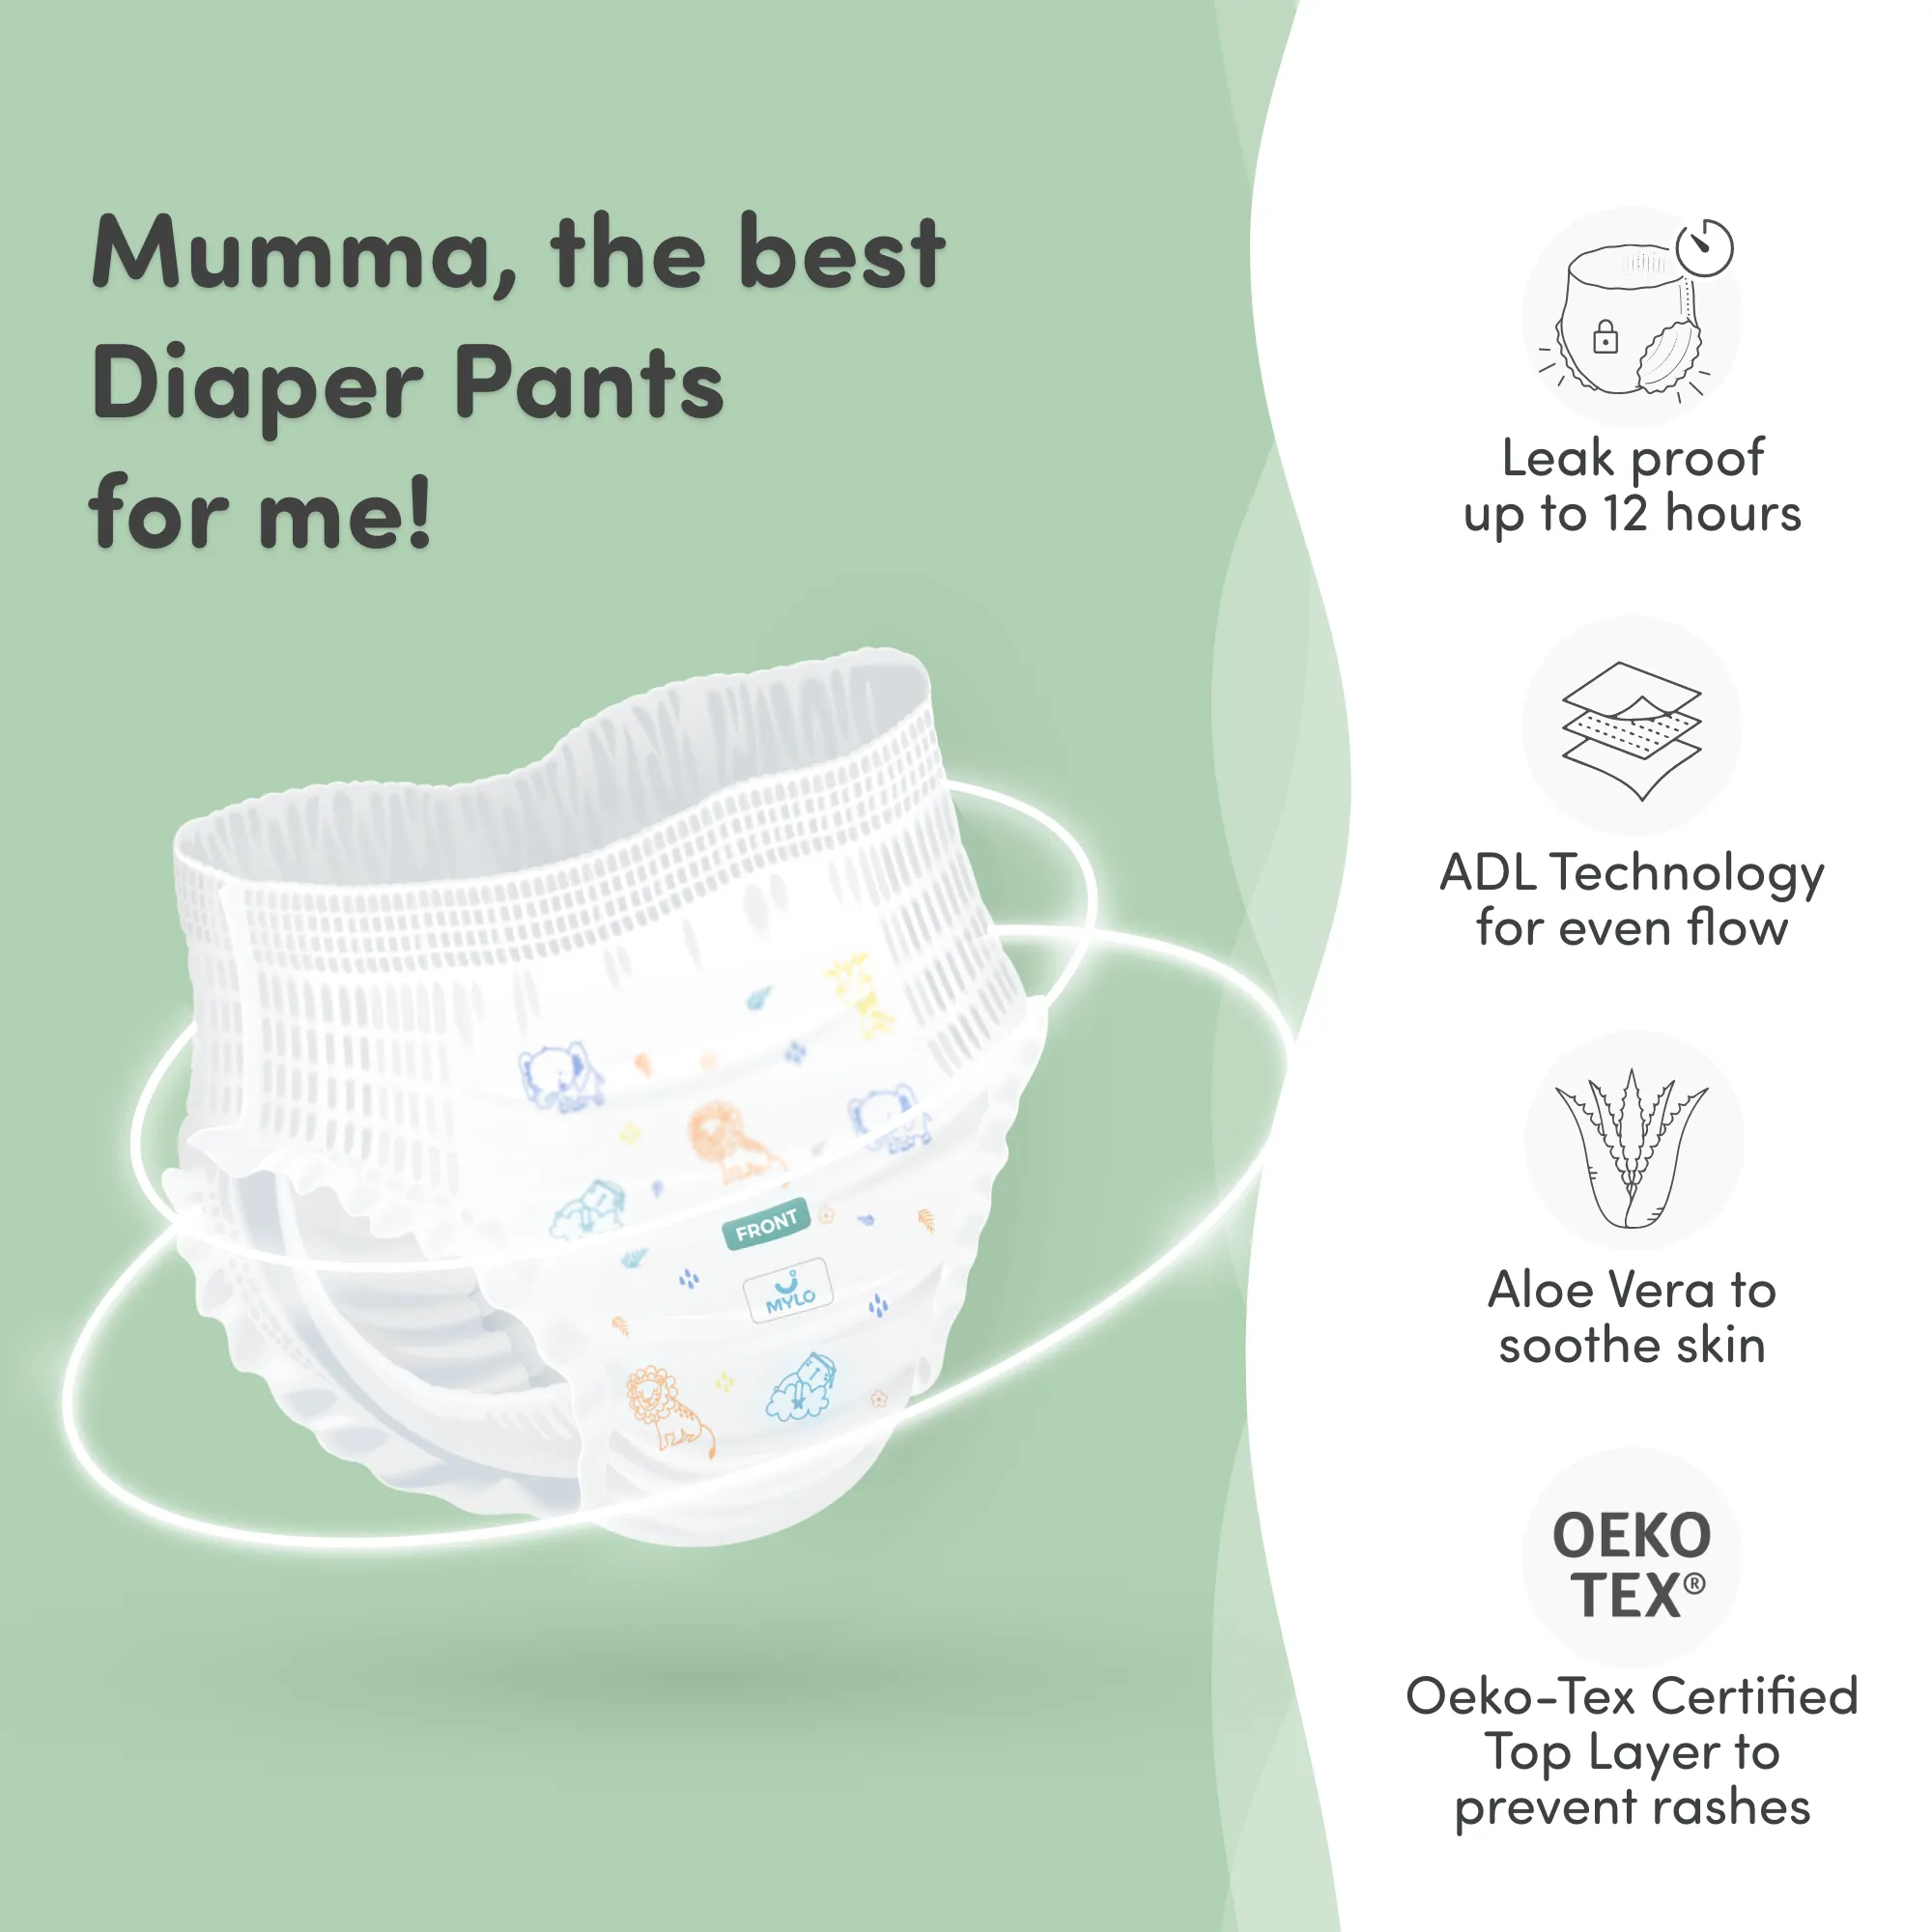 Teddyy Baby Premium Pant Style Diapers Medium 52 Pieces Online in India,  Buy at Best Price from Firstcry.com - 3817624